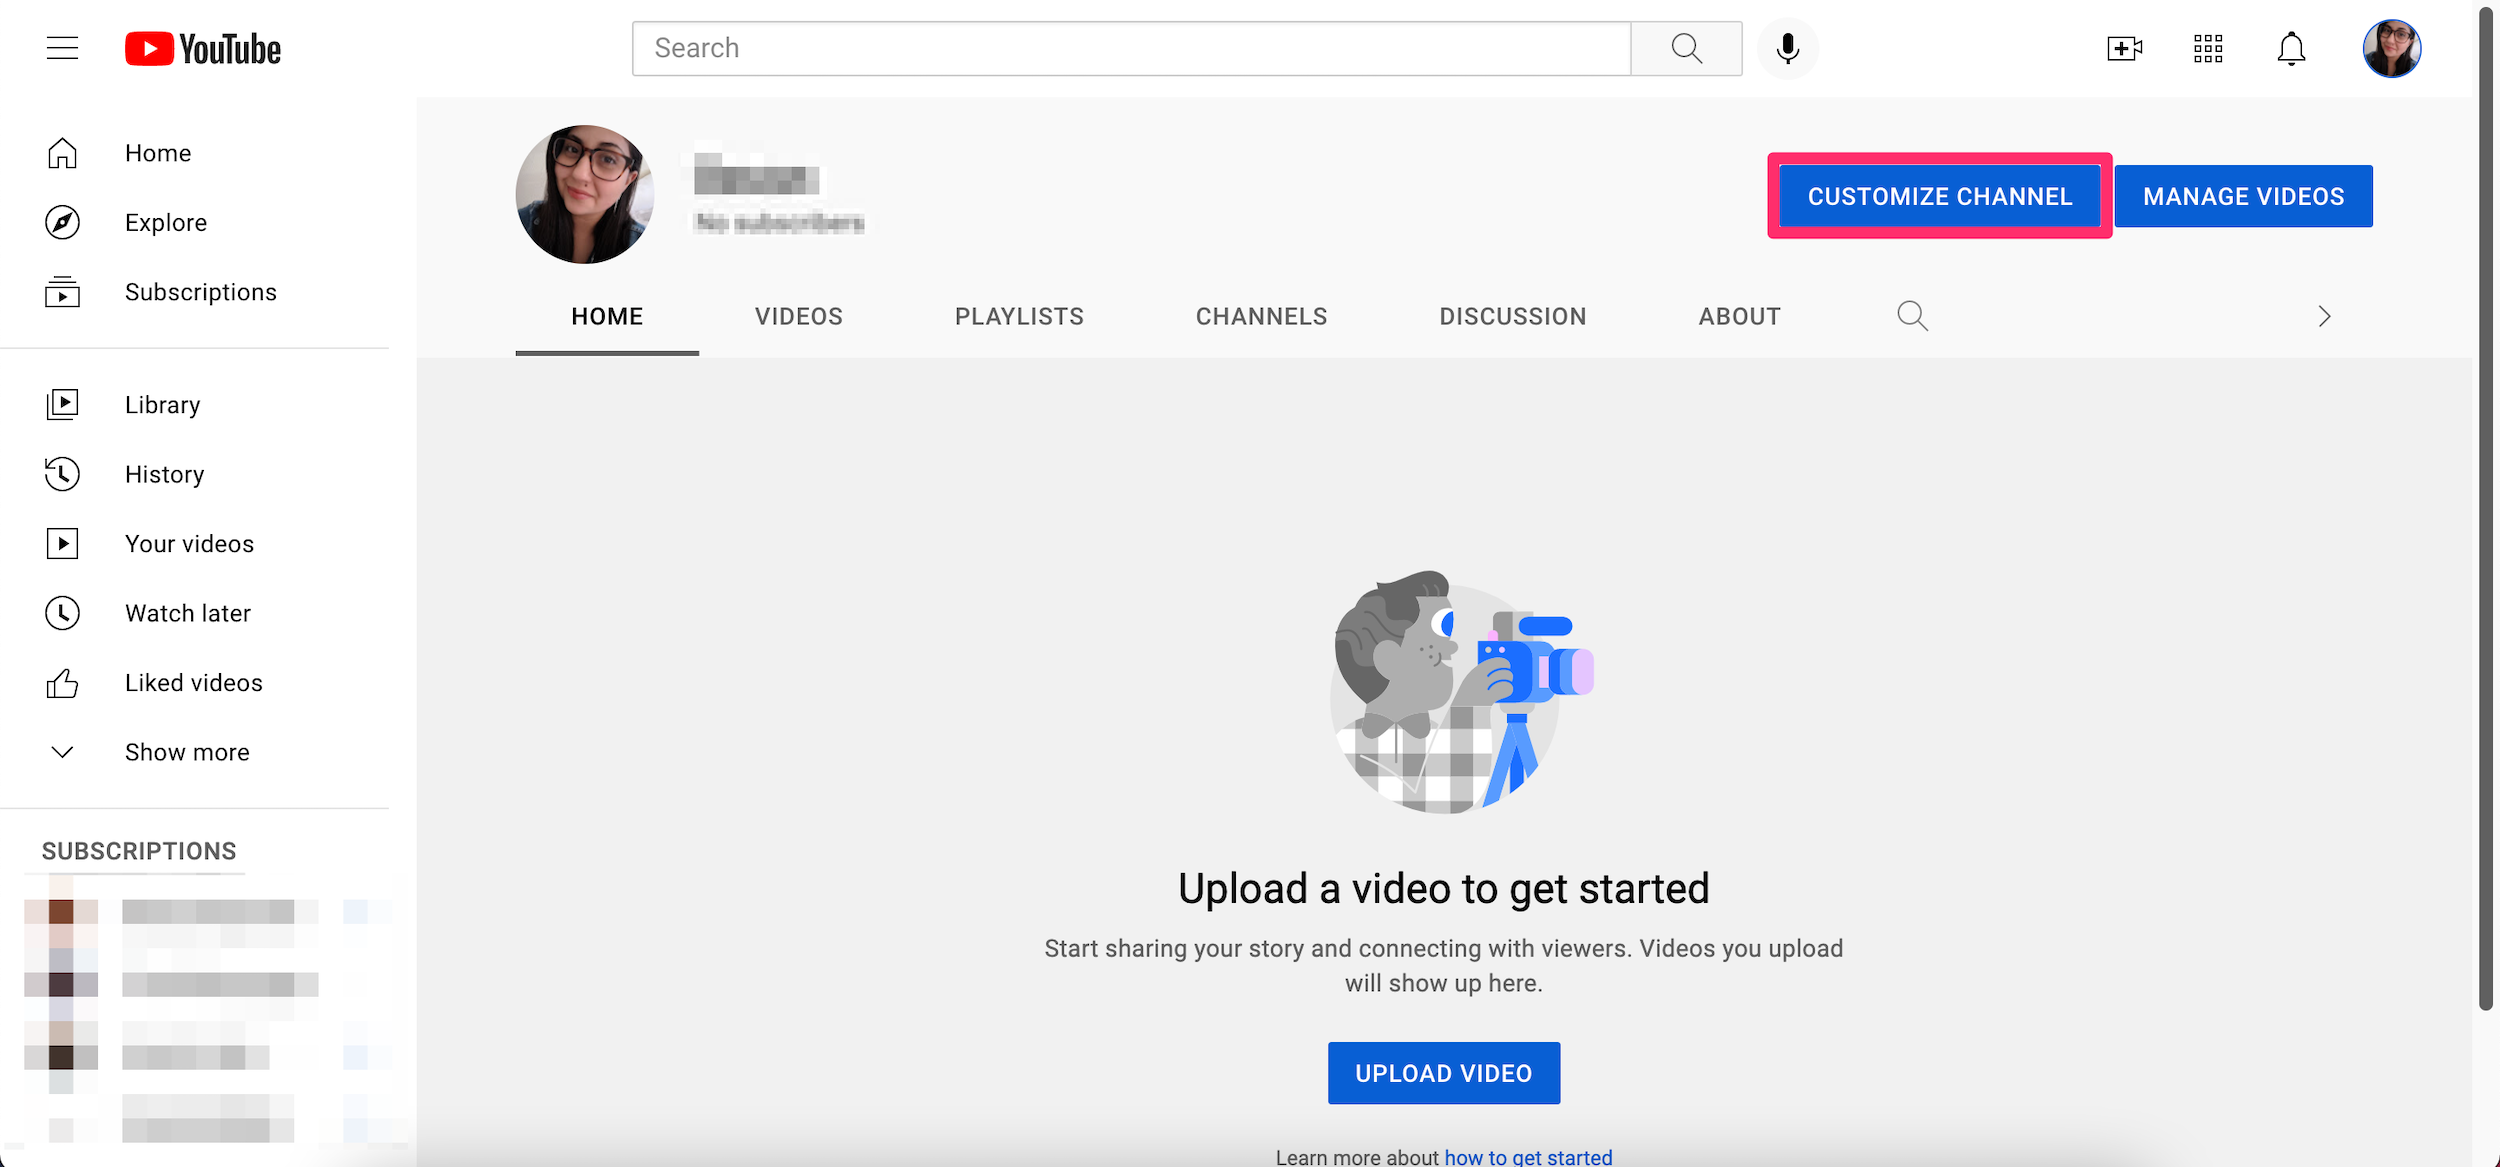 Screenshot of "Your channel" page on YouTube website